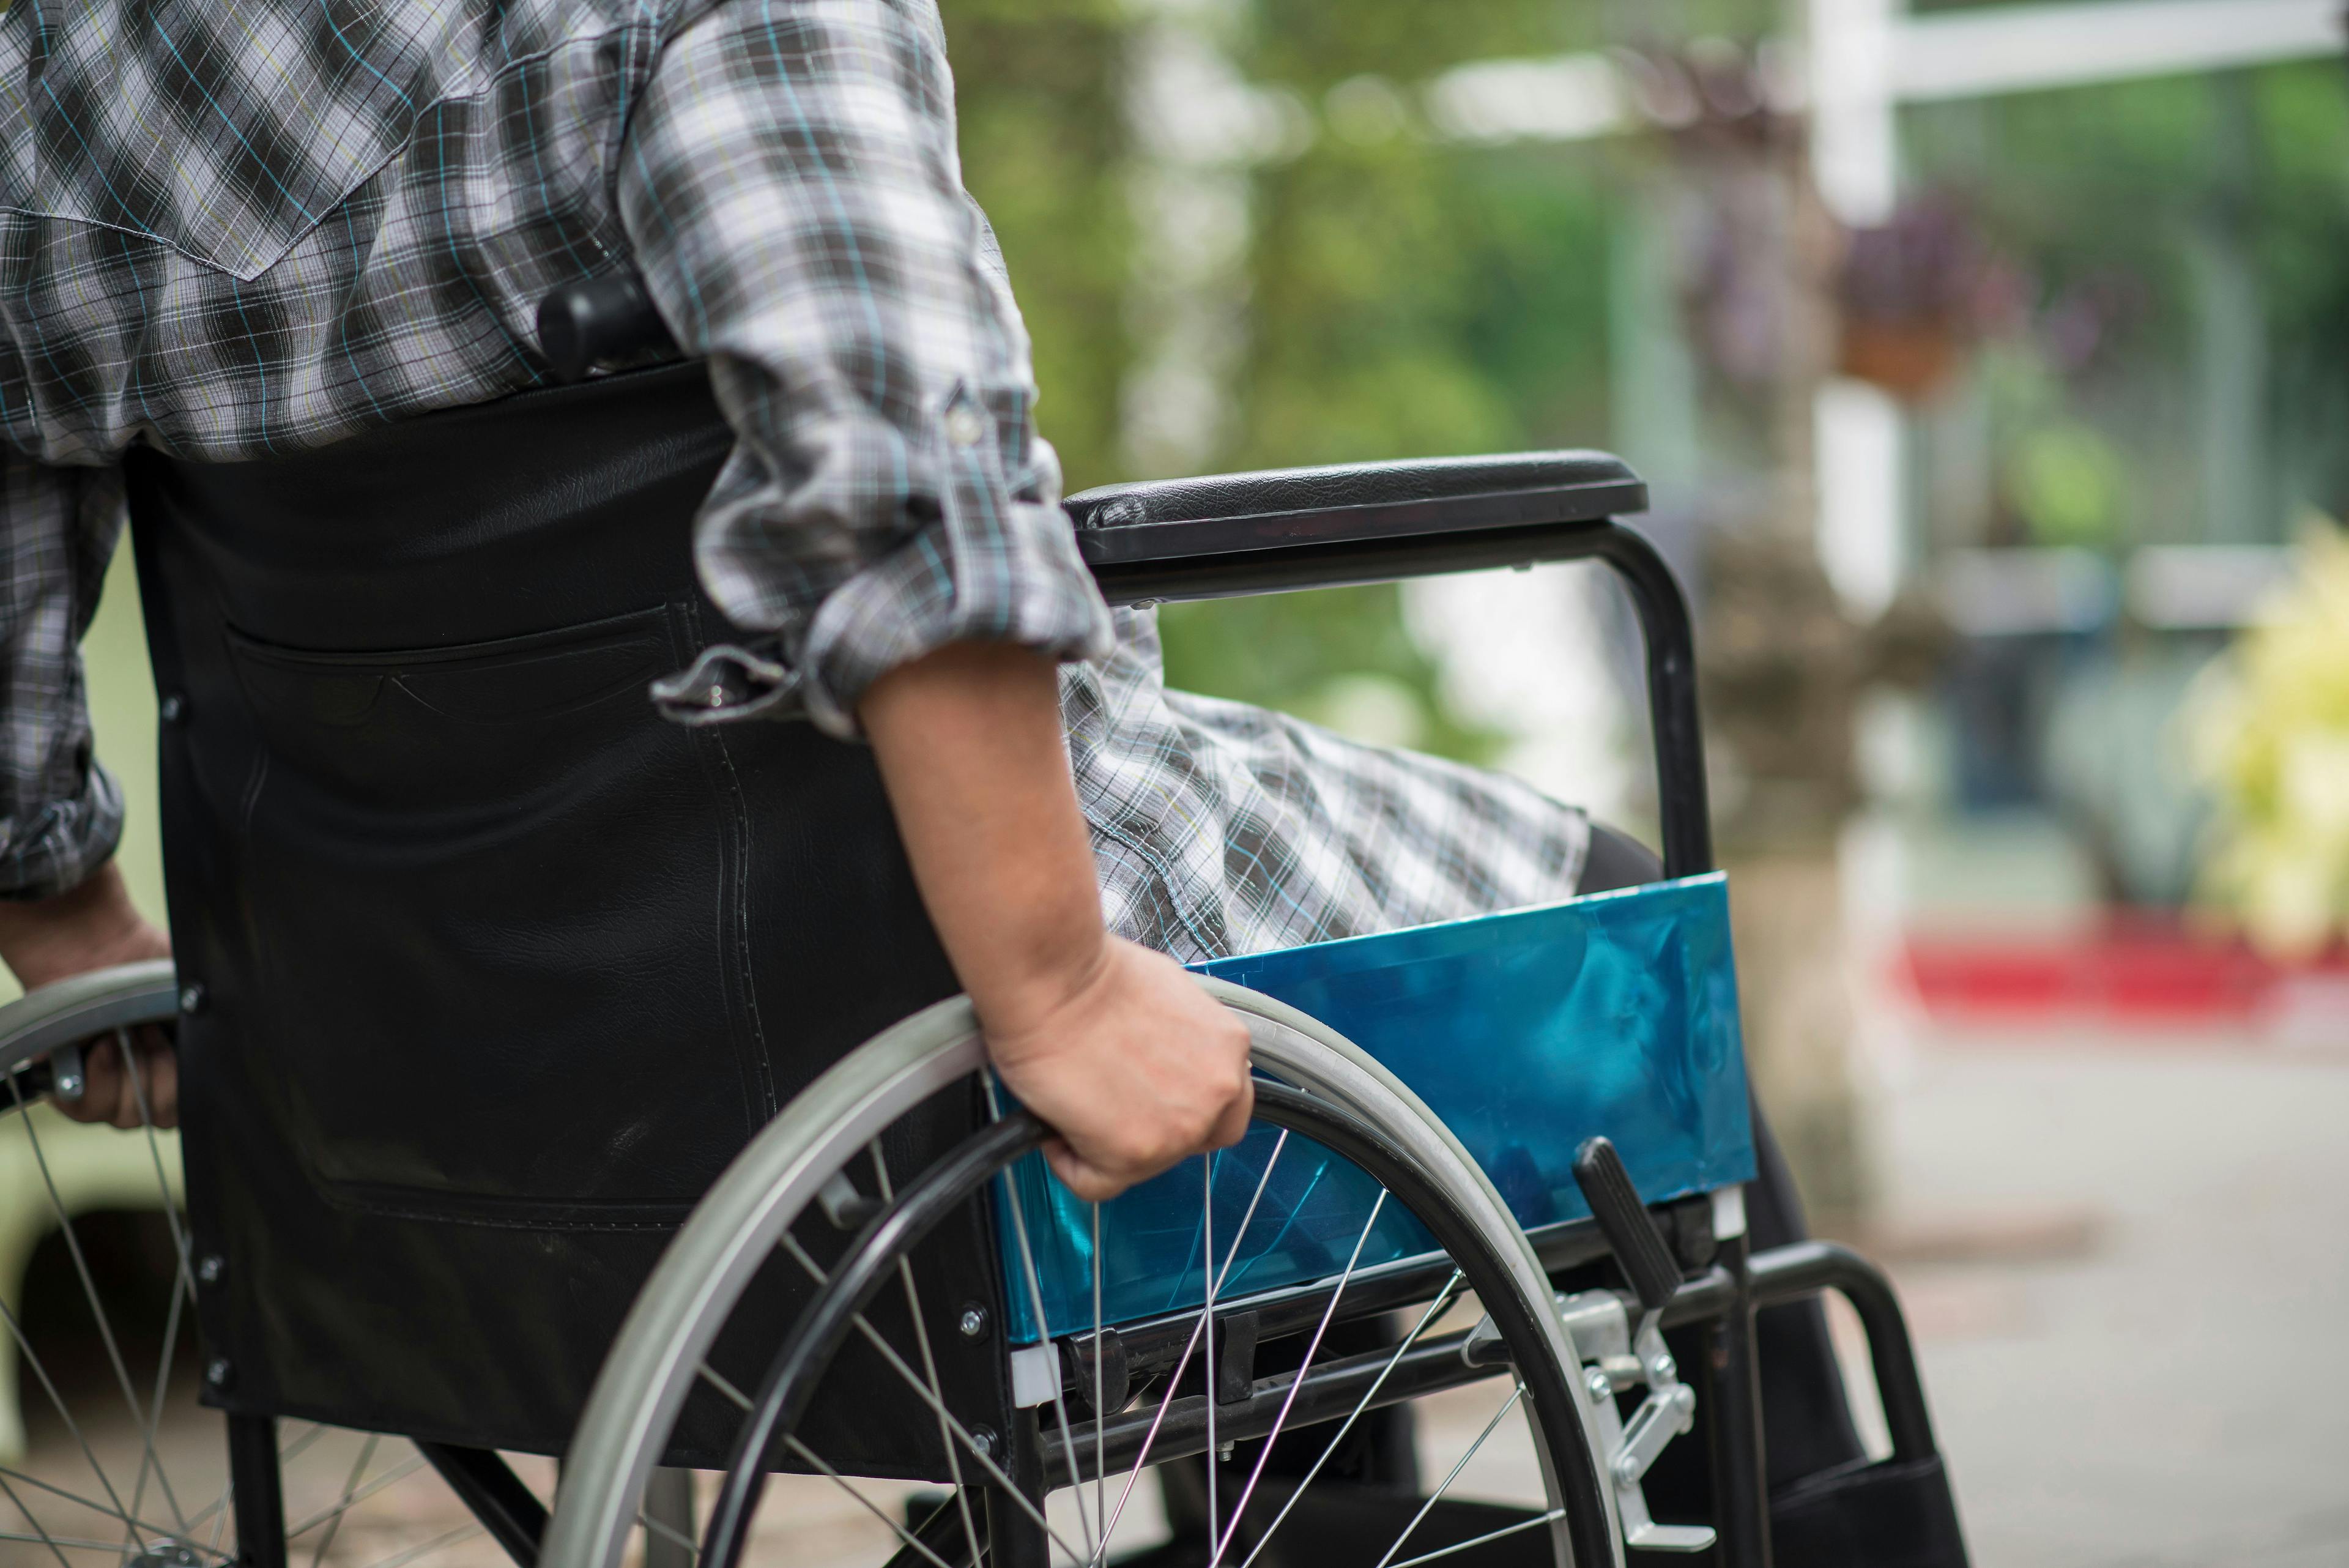 ‘Lifesaving’: Advocates for those with disabilities hail rule to bar discrimination in healthcare